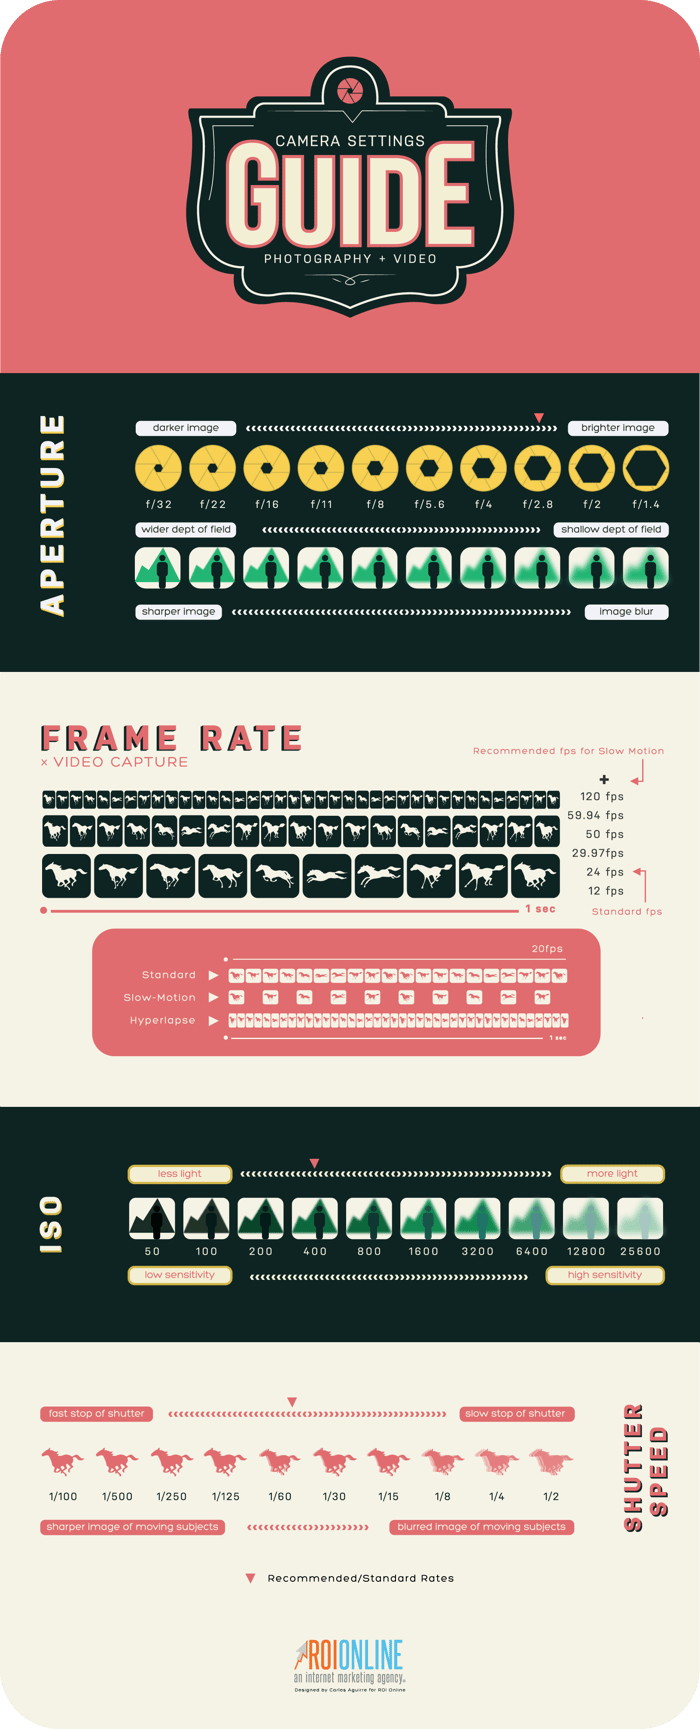 Camera Settings Guide_Infographic-01.png